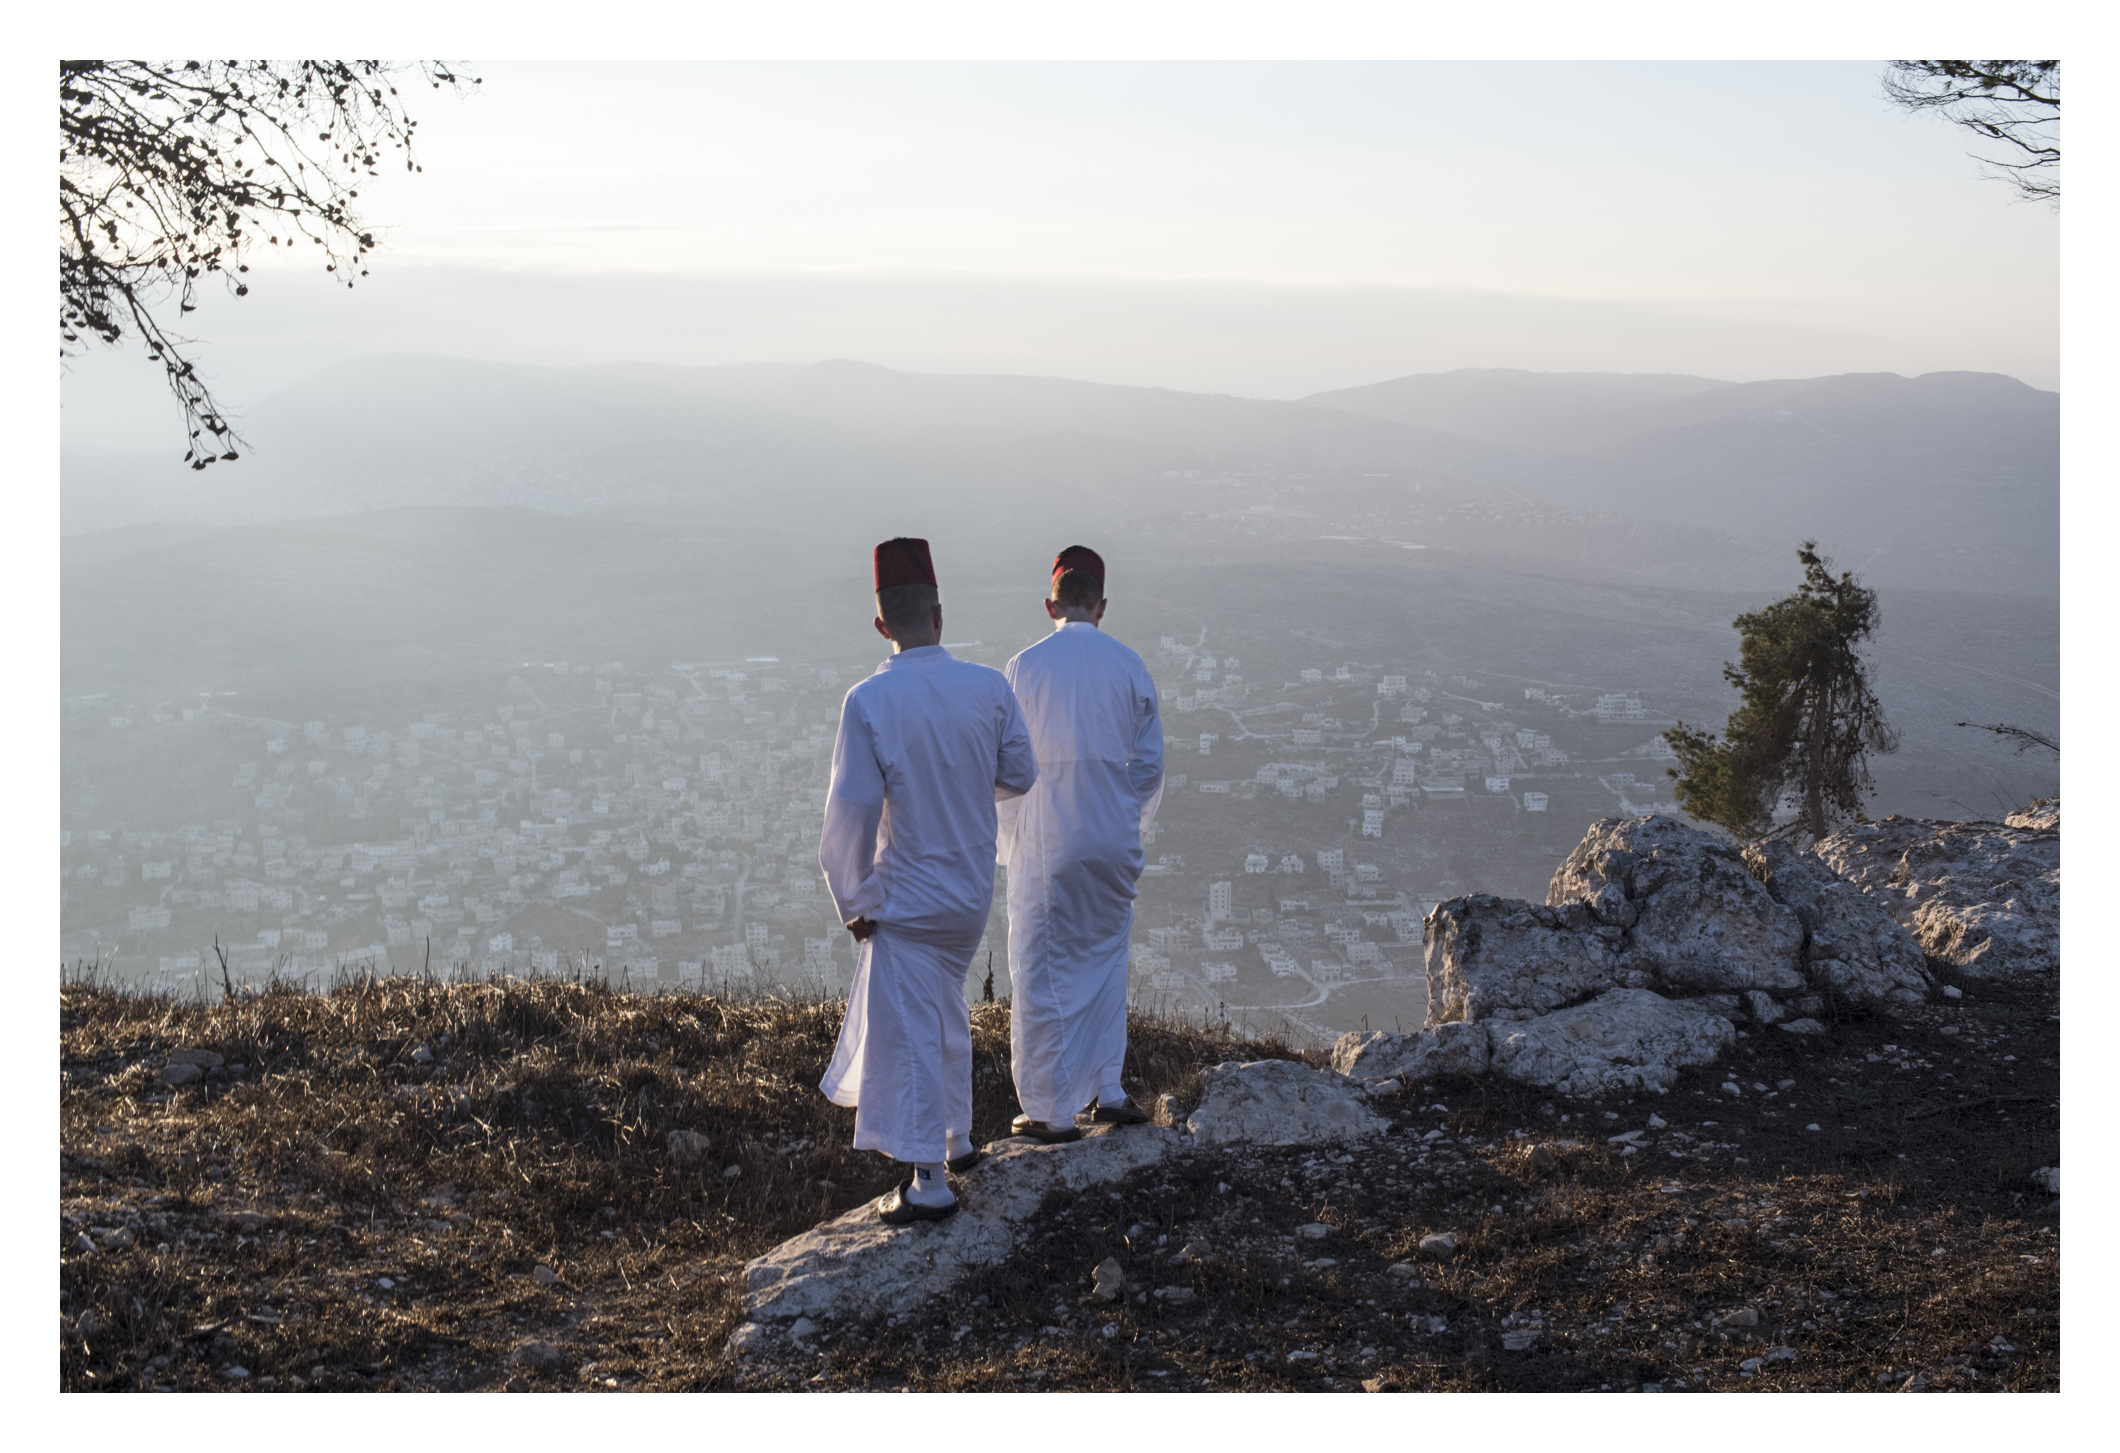  After the final prayer with book , youth of assorted ages and men take a pause on mountain and relax, overlooking the view of mountain after sunrise. Here, they are standing near the enclosed area they say is where Isaac's father was tested for sacr